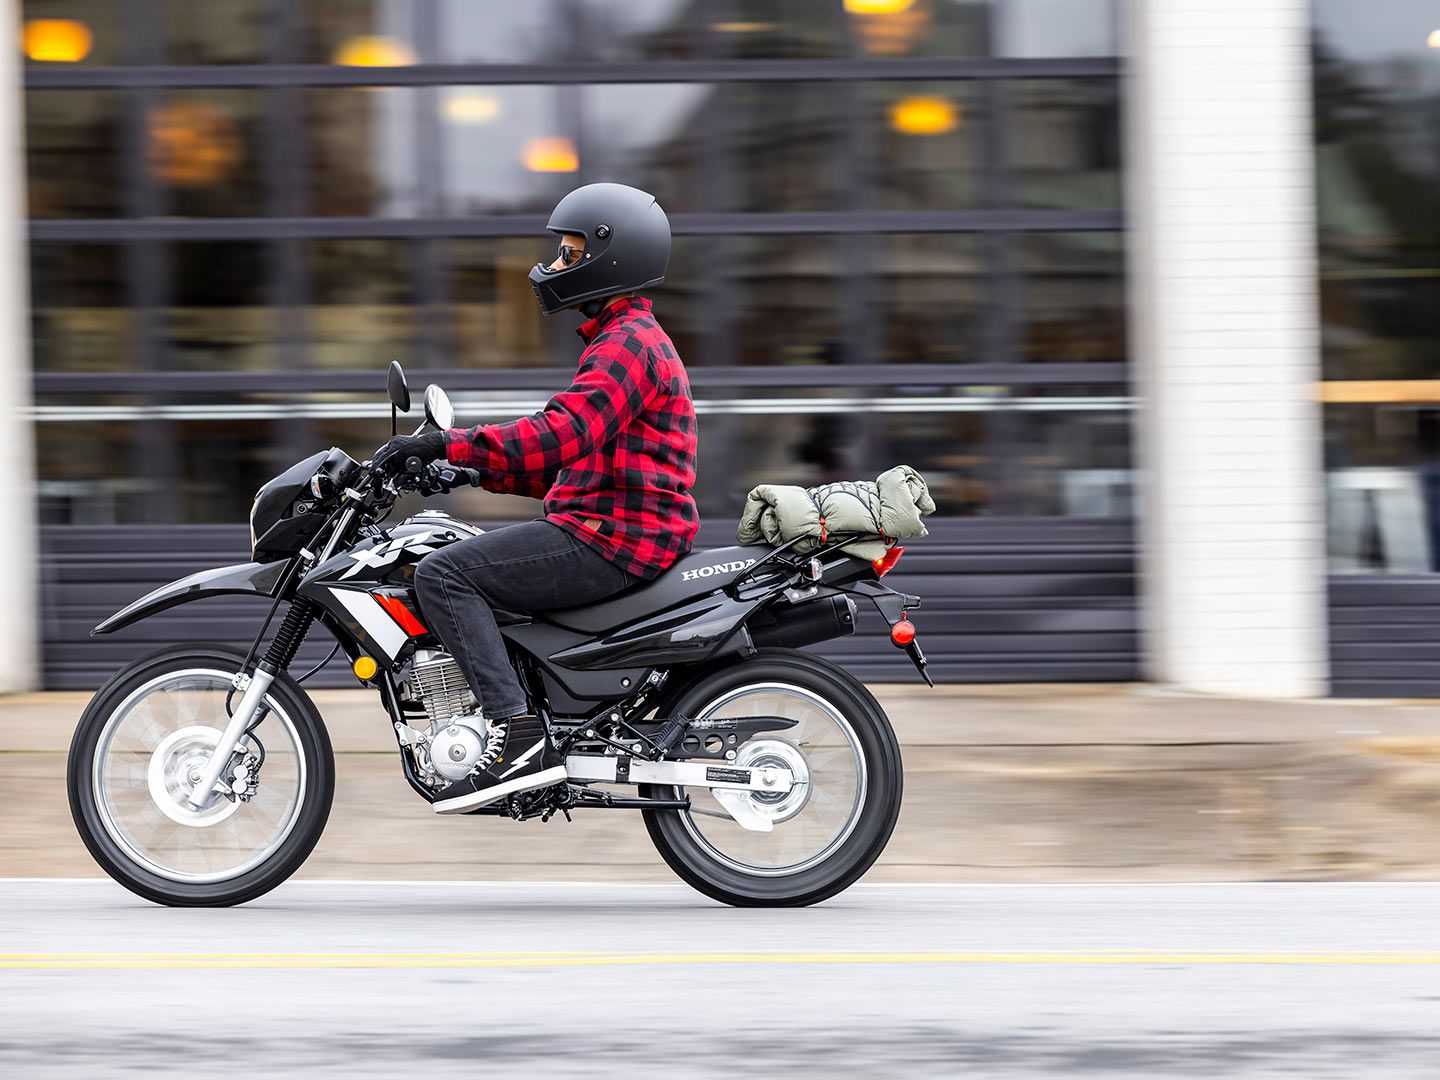 Stowing some equipment on the XR150L’s standard luggage rack could be useful for city rides and weekend adventures alike.